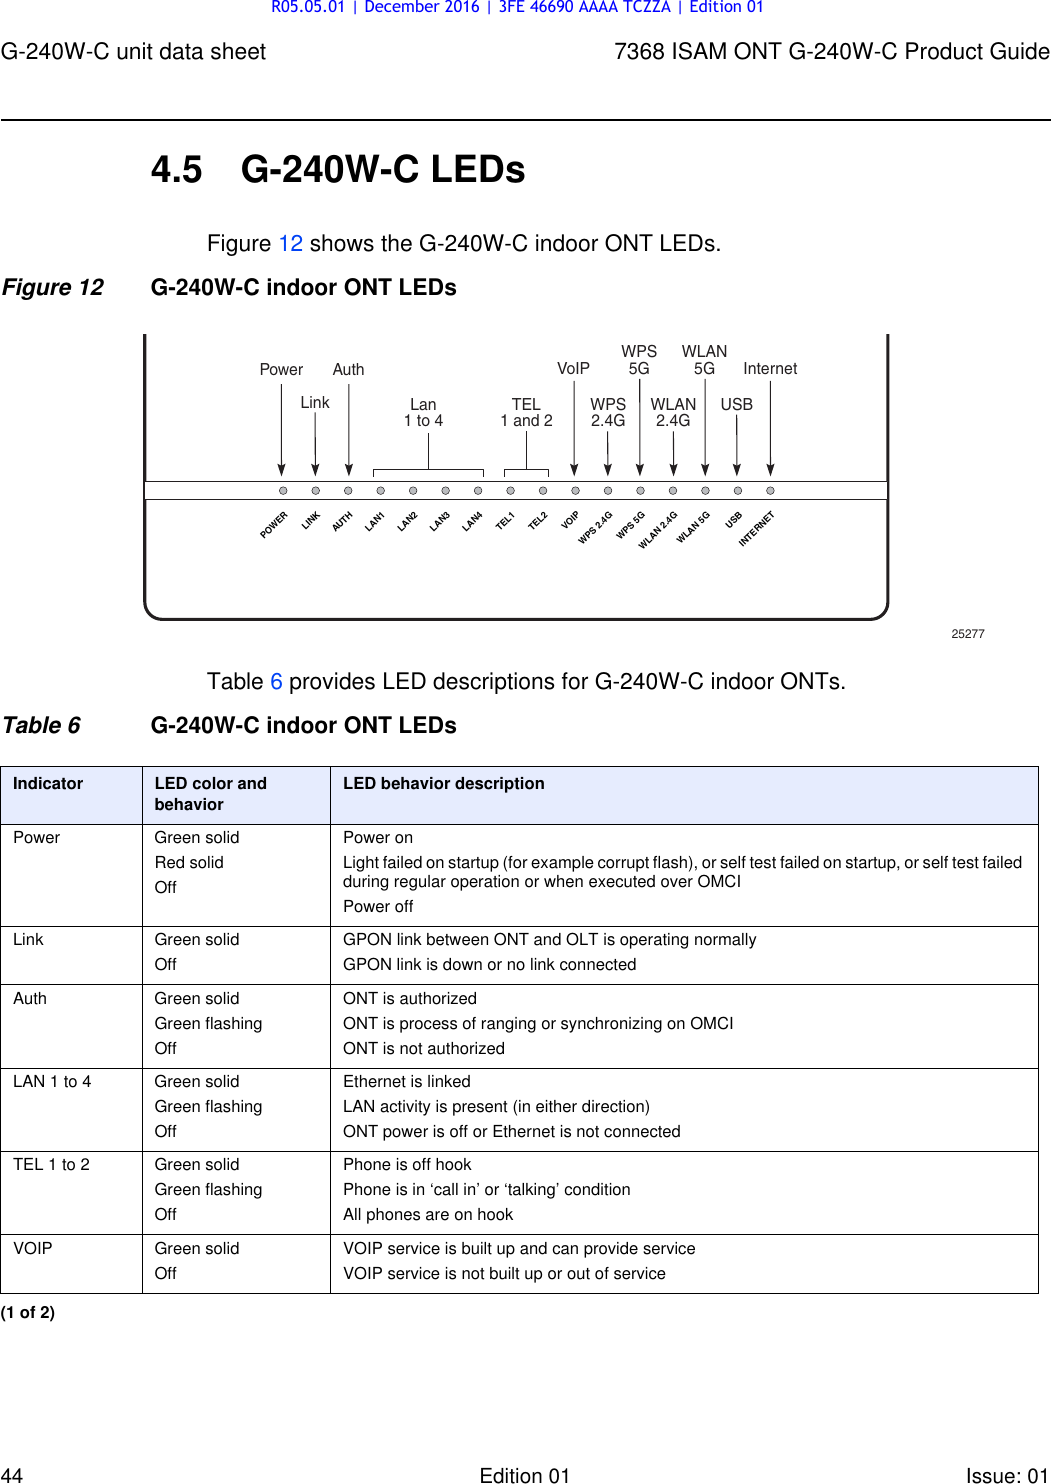 Page 44 of Nokia Bell G240W-C GPON ONU User Manual 7368 ISAM ONT G 240W B Product Guide